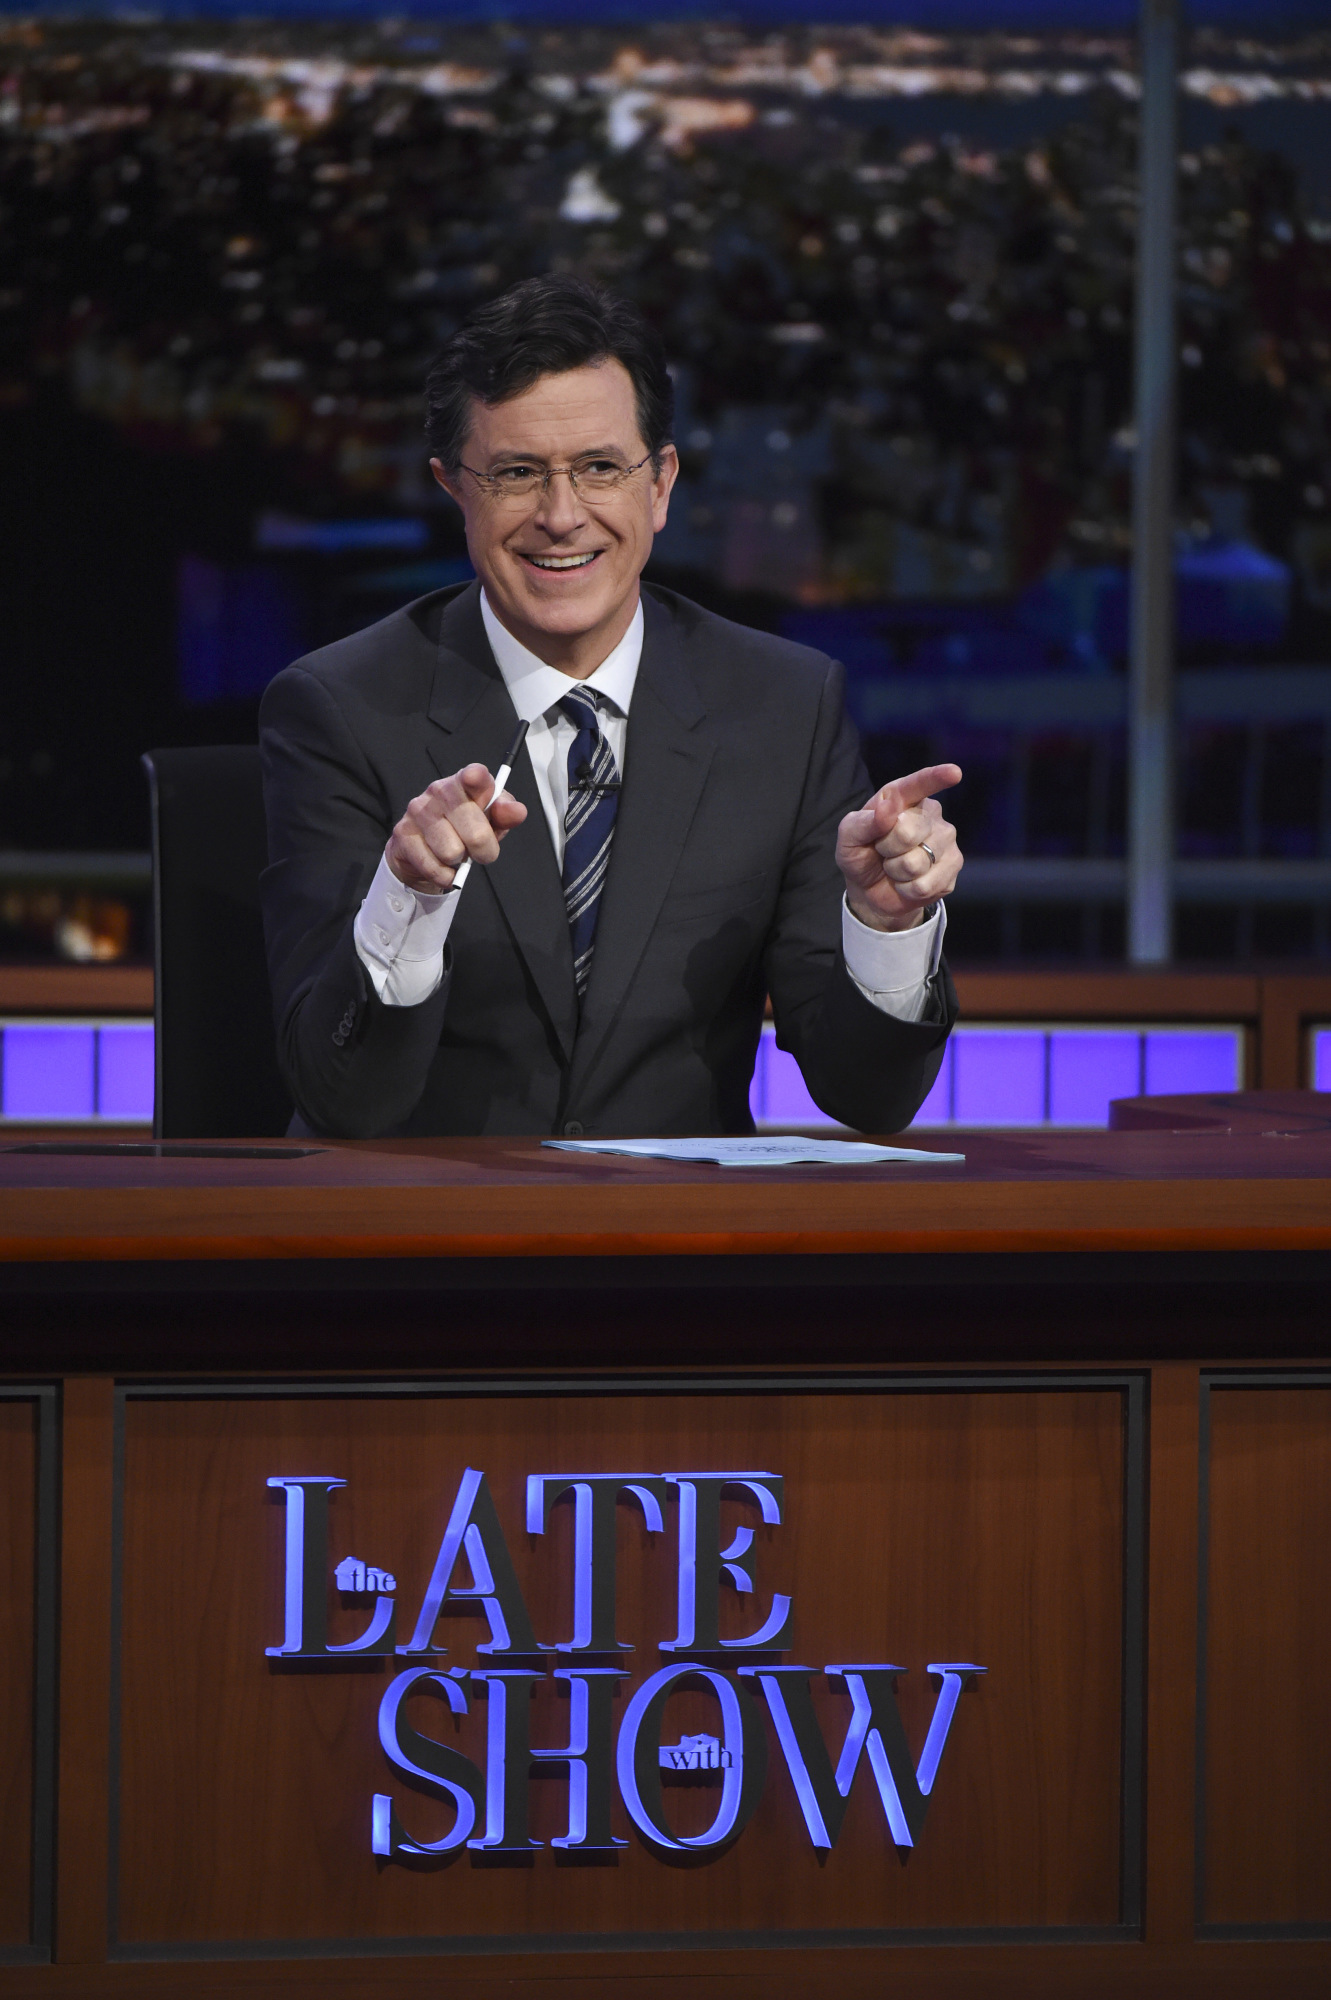 Stephen Colbert on The Late Show with Stephen Colbert in New York on April 21, 2016.